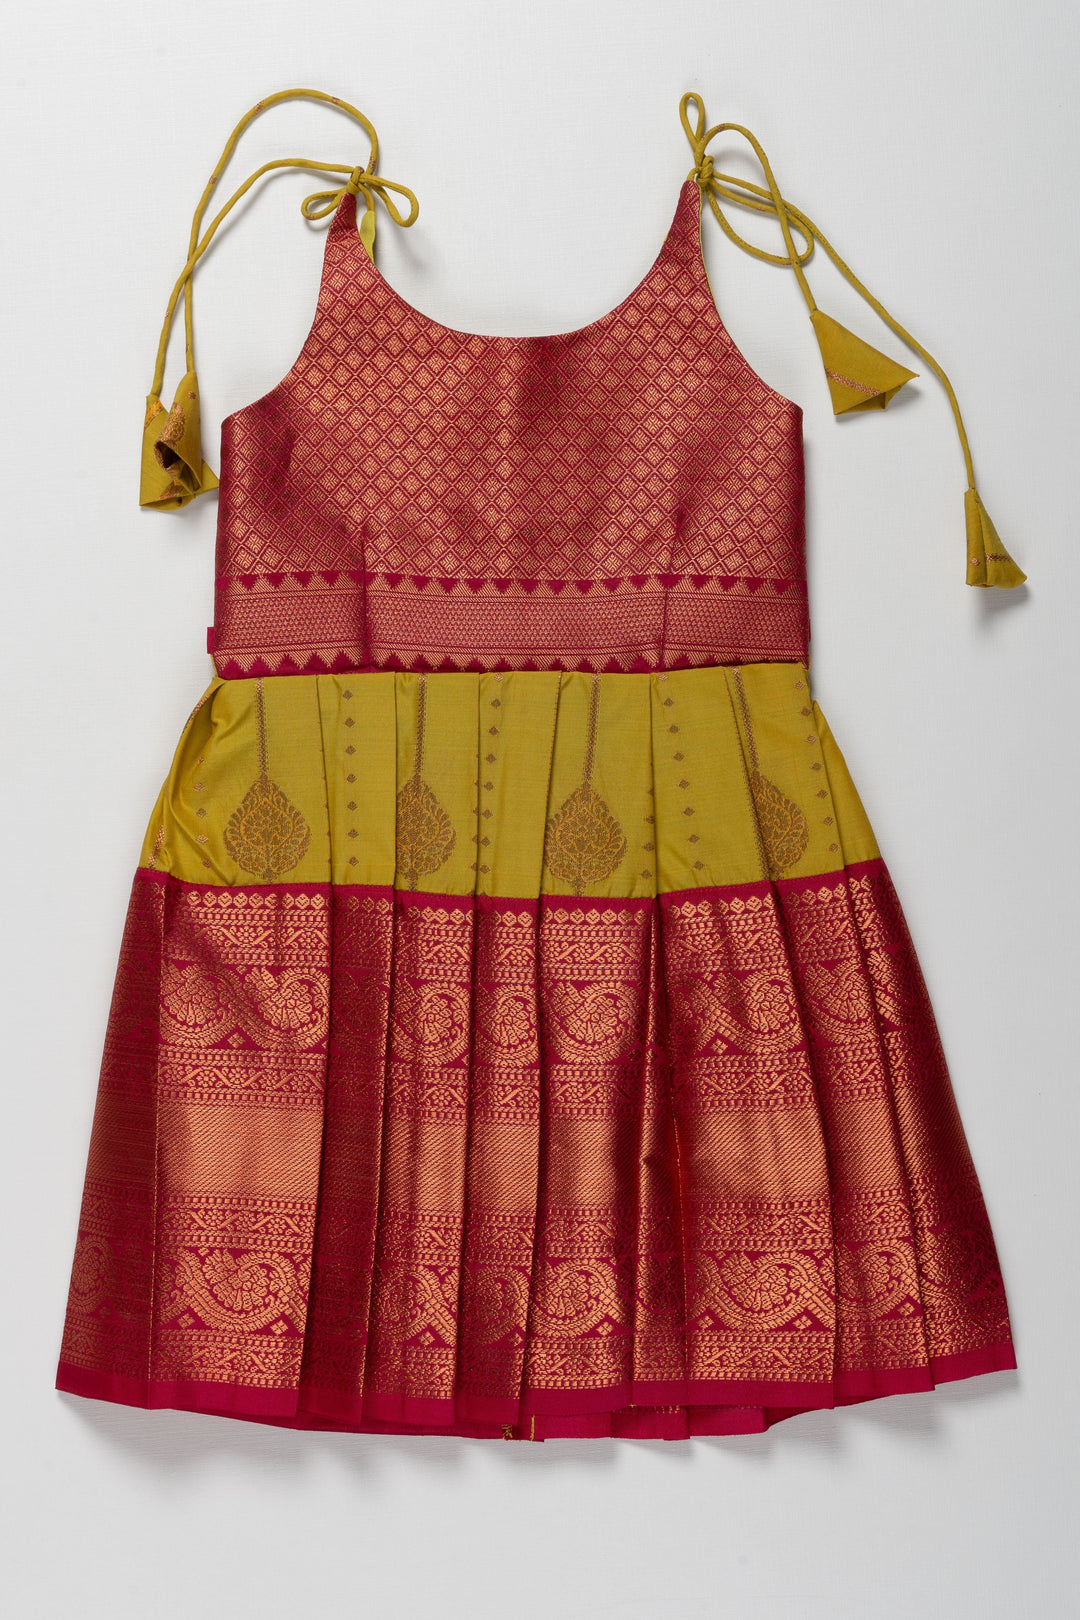 The Nesavu Tie-up Frock Radiant Red and Yellow Banarasi Tie-Up Frock for Temple Functions and Naming Ceremonies Nesavu 14 (6M) / Yellow / Style 2 T383B-14 Radiant Red and Yellow Banarasi TieUp Frock for Girls | Traditional Festive Wear | The Nesavu